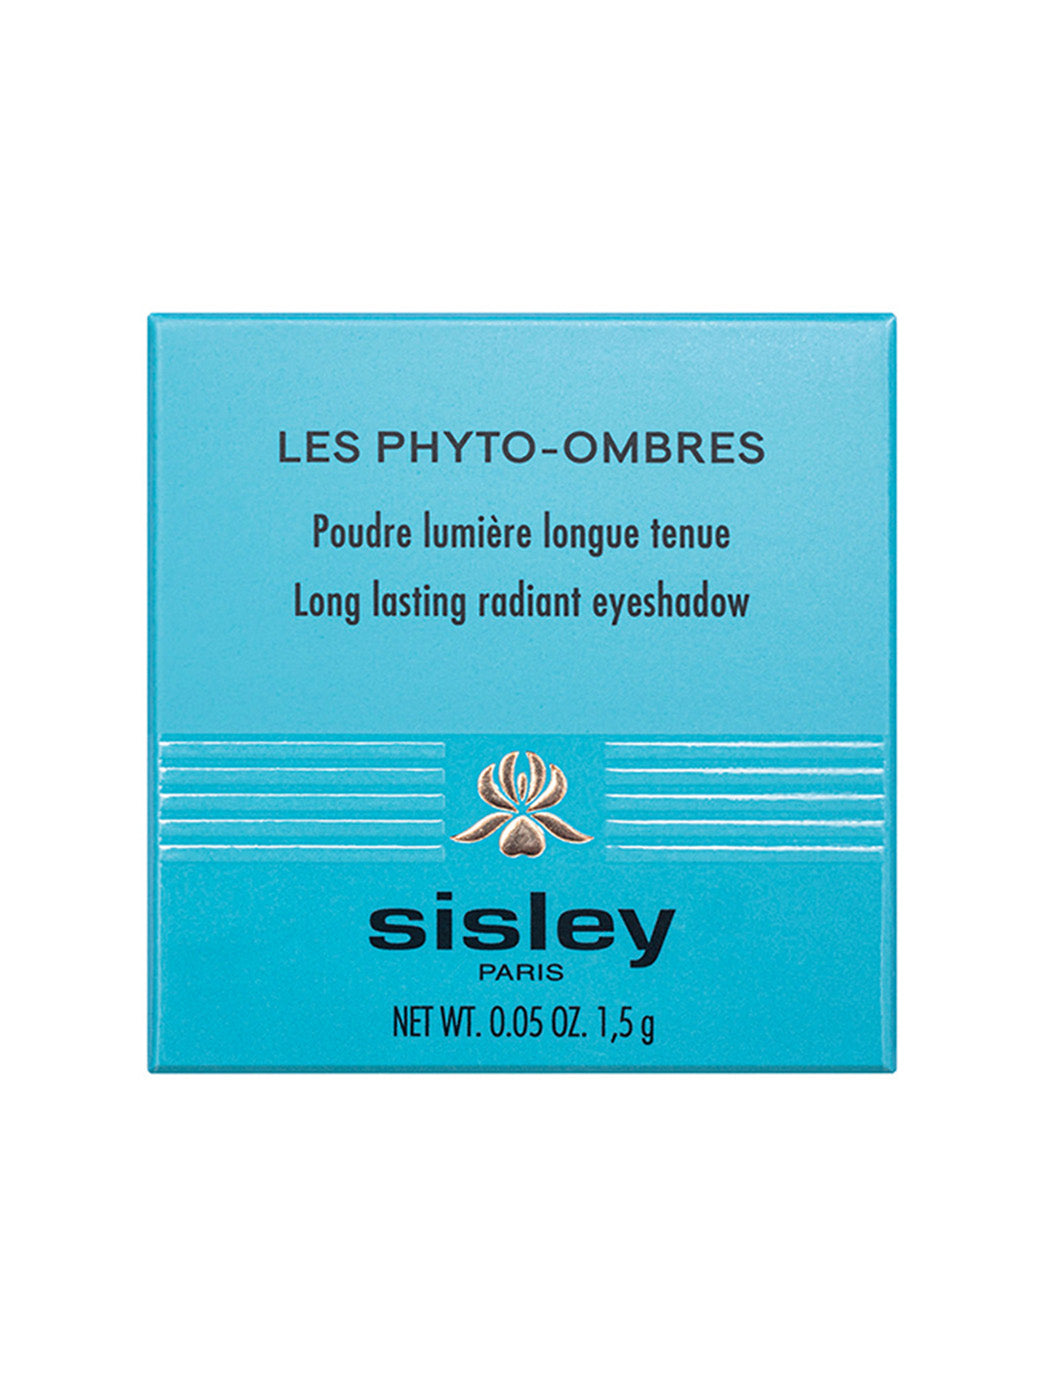 42472957640854 - Les Phyto-Ombres